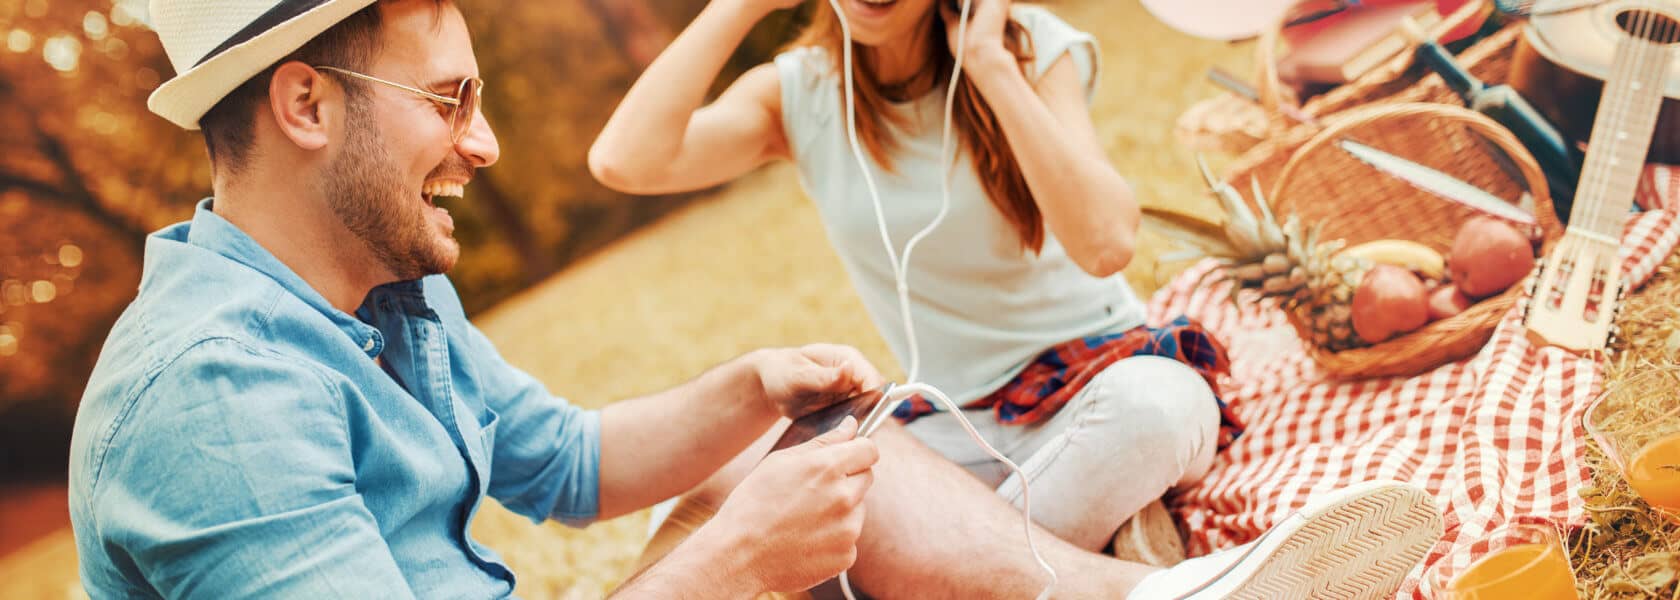 Does Music Affect Your Dating Life